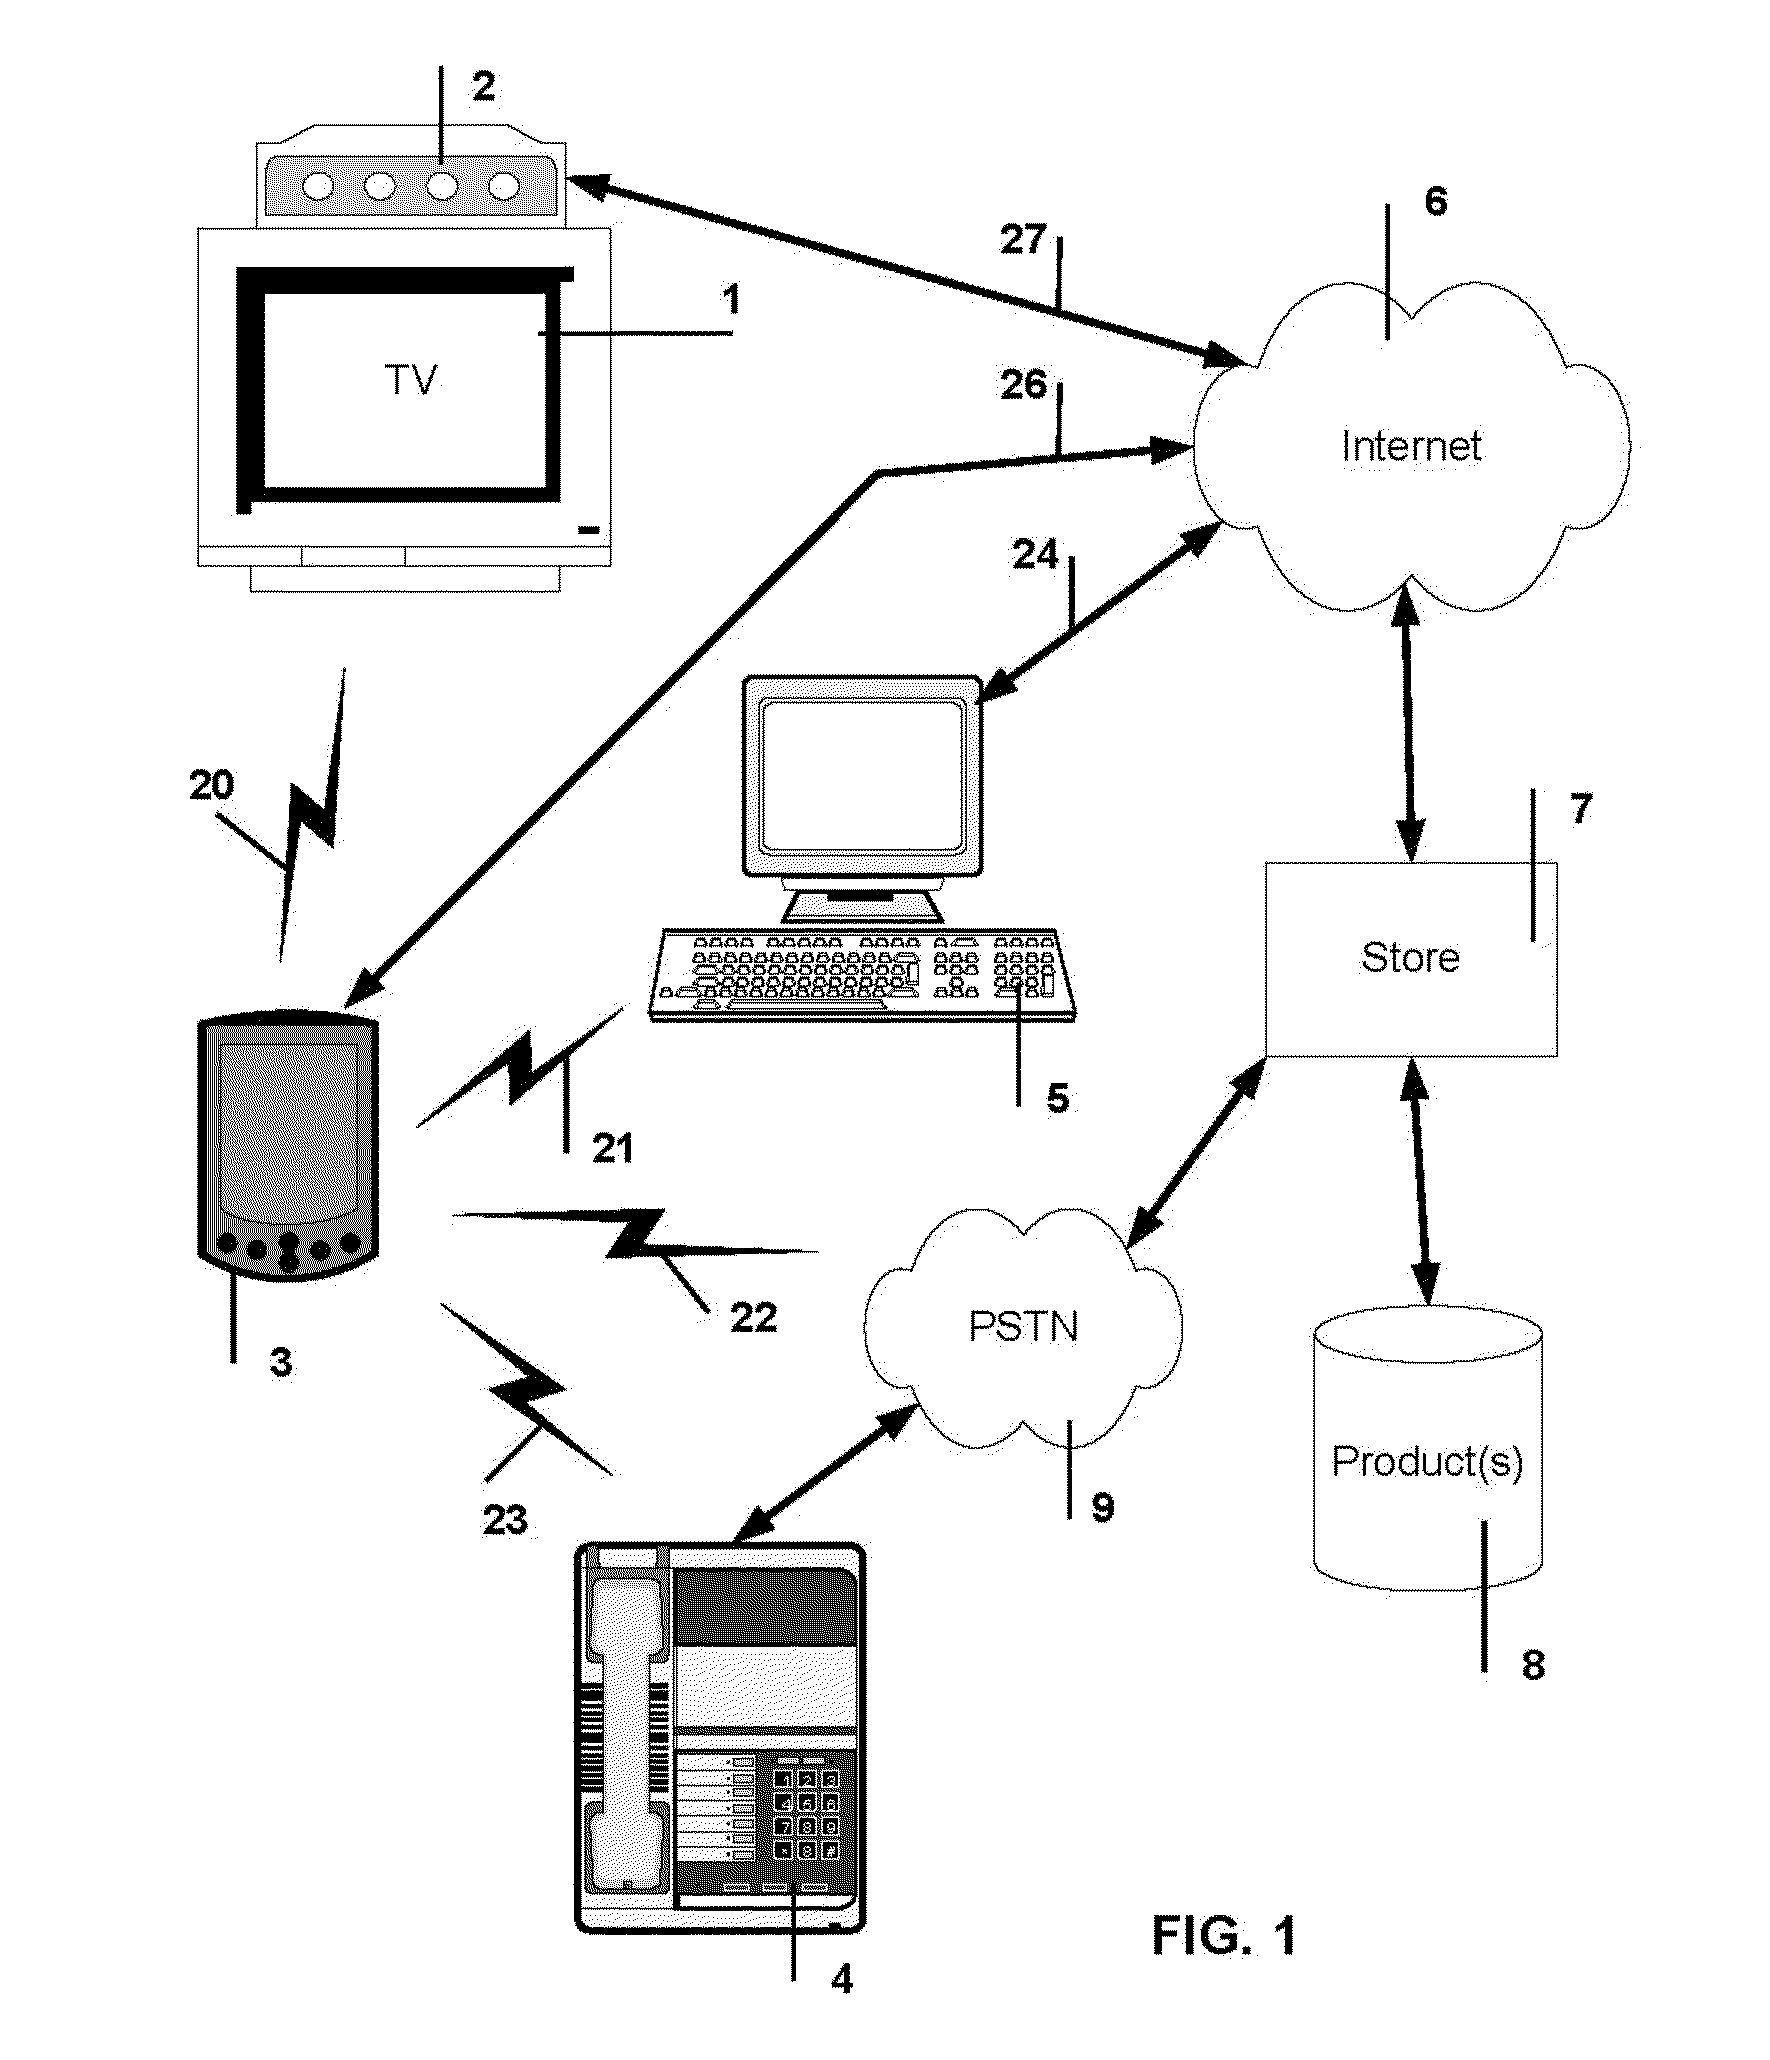 Television system to extract television product placement advertisement data and to store data in a remote control device